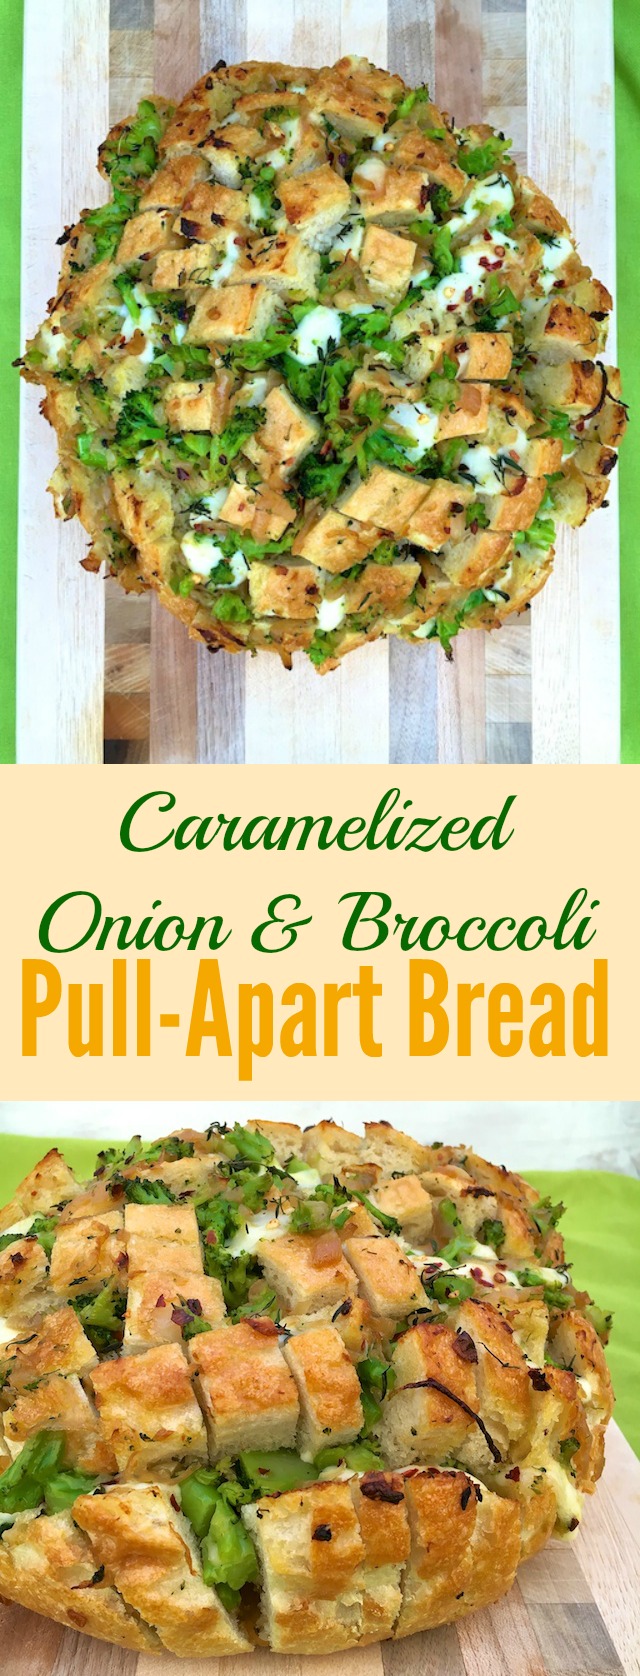 Caramelized Onion & Broccoli Pull-Apart Bread: A savory version of monkey bread featuring sweet onions, broccoli and melted cheese - perfect for game day or entertaining.